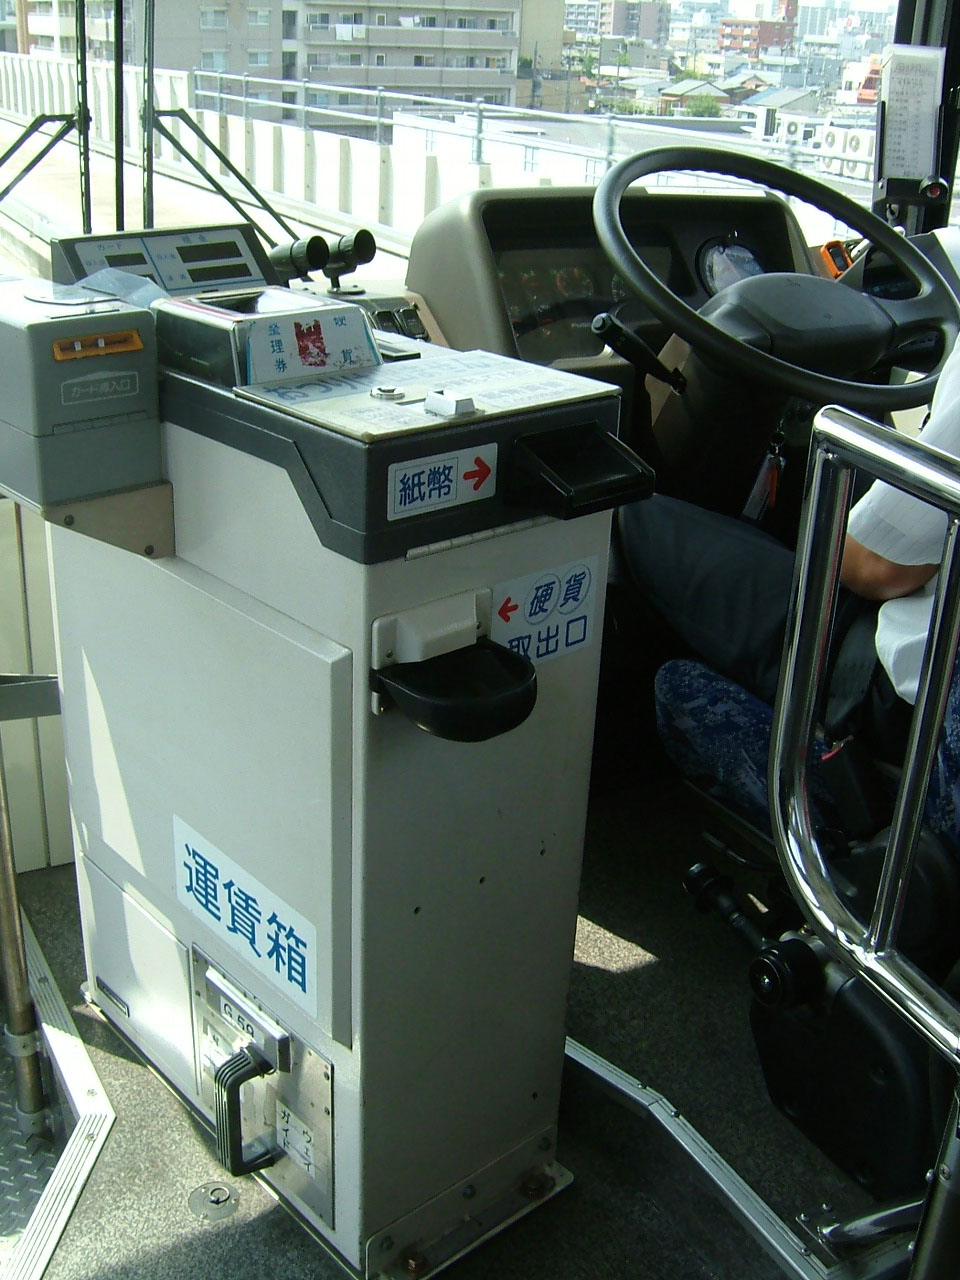 Fig. 18.3 All-purpose bus fare collection machine in Nagoya, Japan.